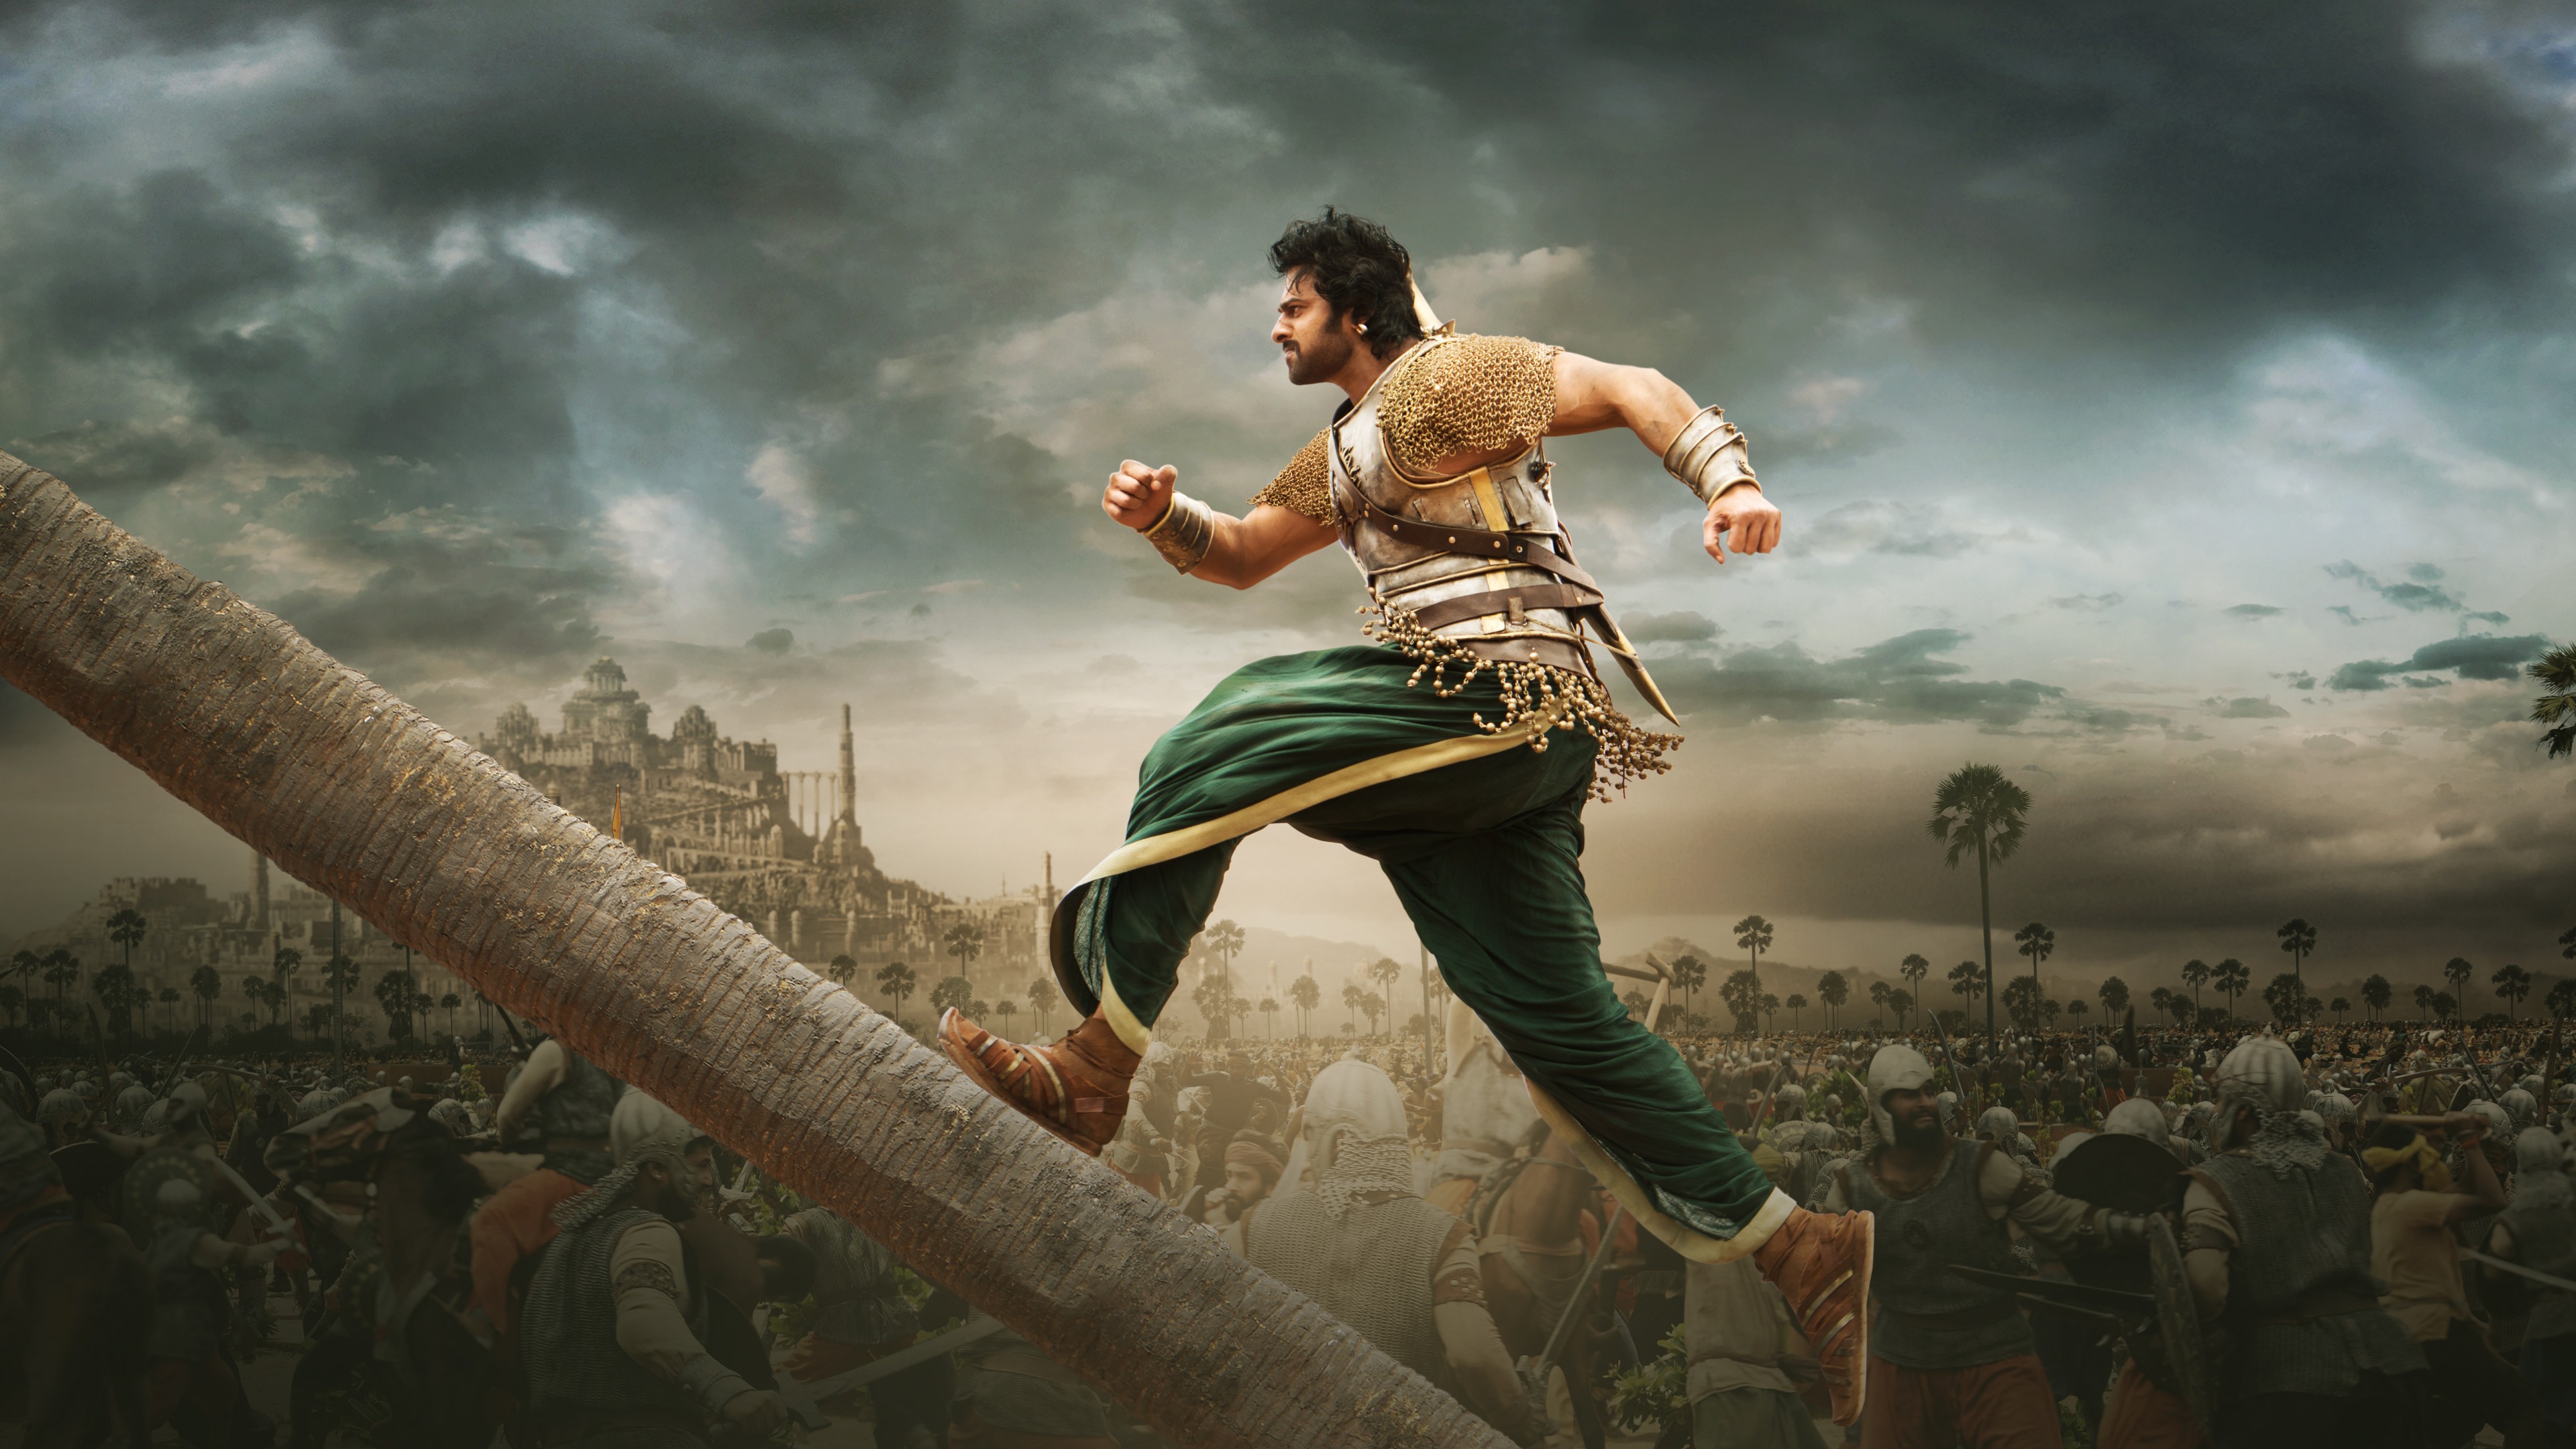 curtis swann recommends download bahubali part 2 pic